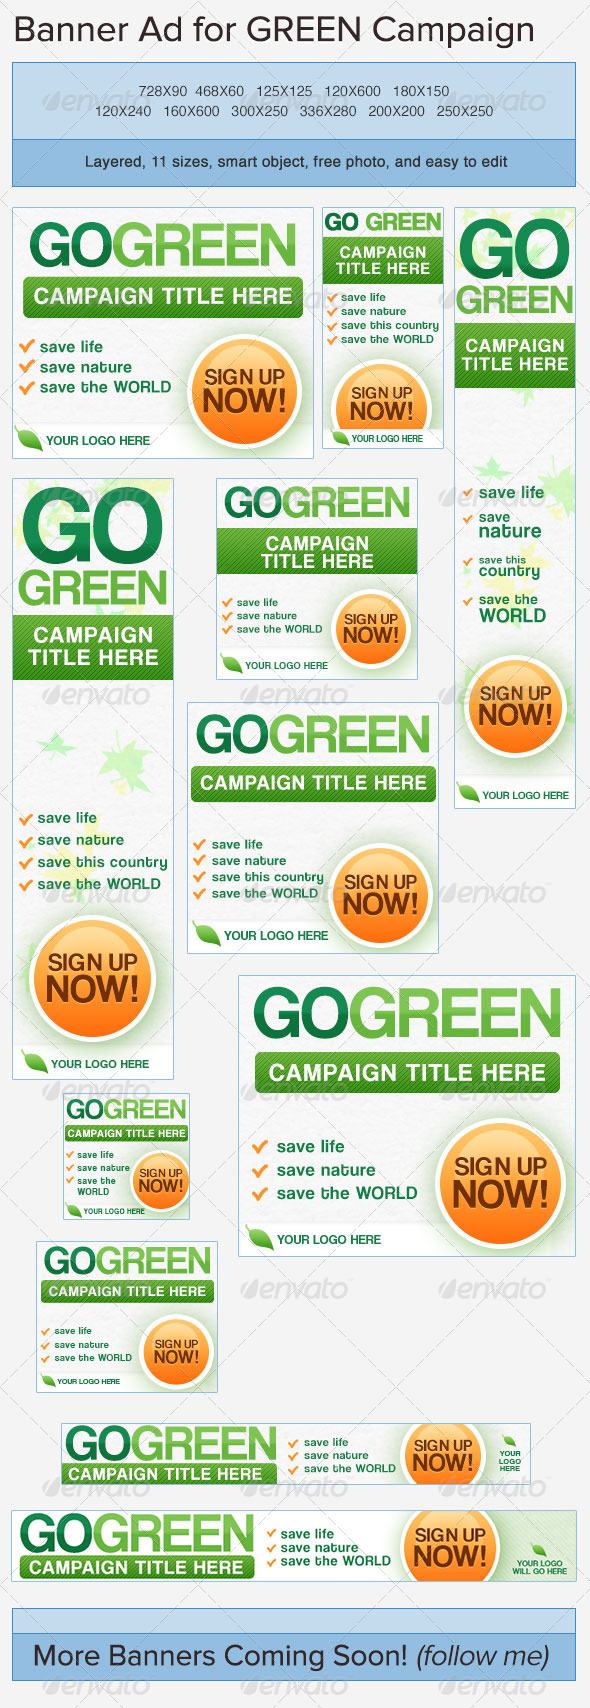 Nature Banners Ad Templates From Graphicriver - sizes 728x90 160x600 or 300x250 roblox town